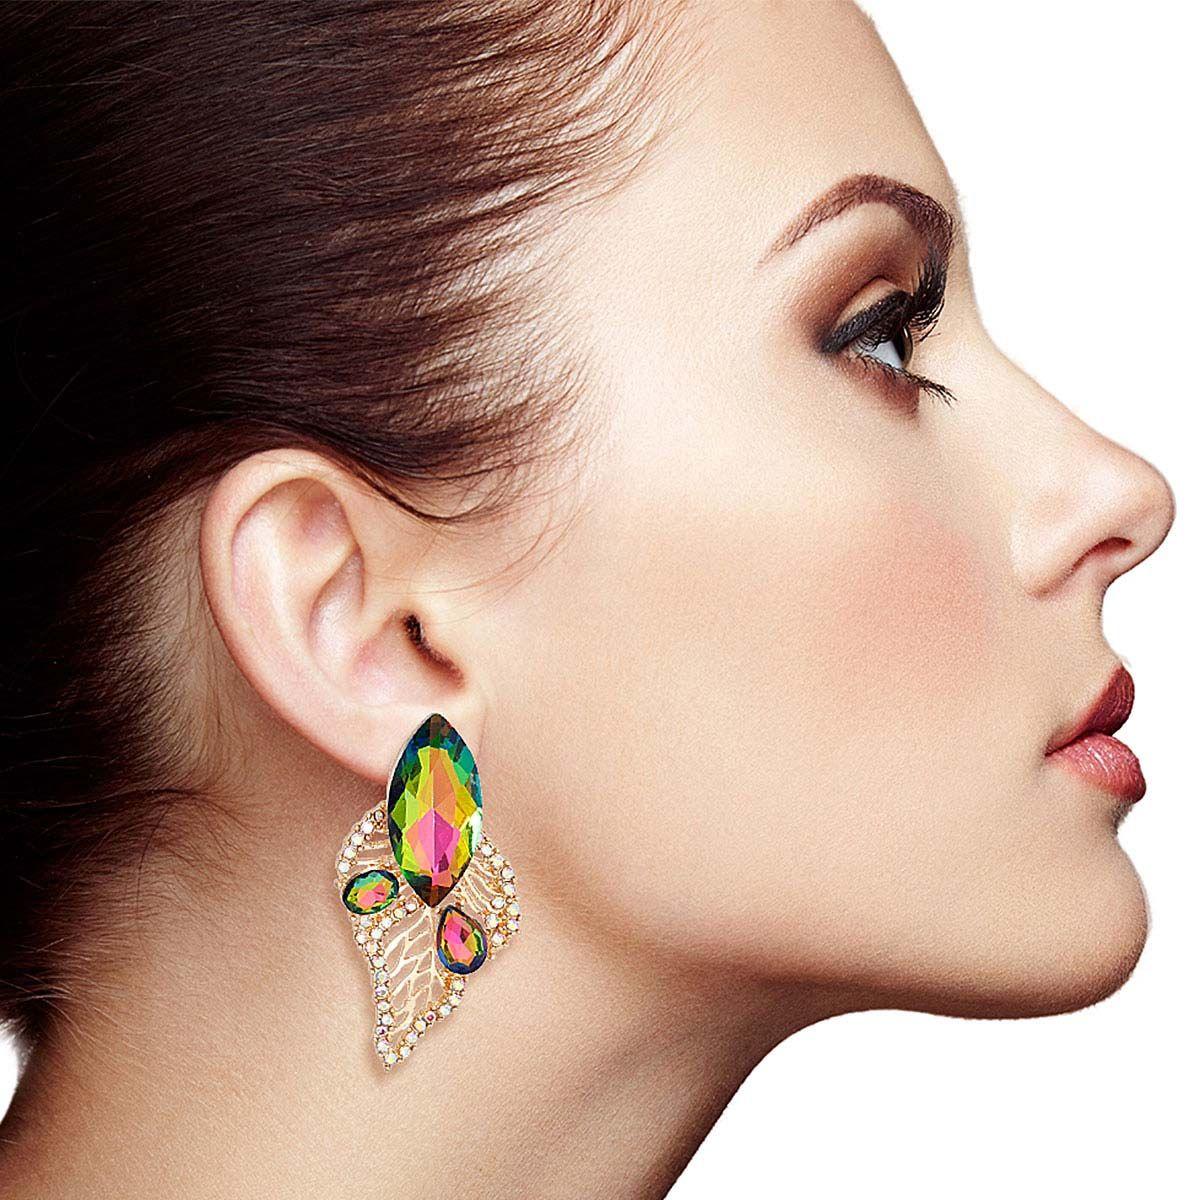 Shop Now: Trendy Pink and Green Gold Leaf Stud Earrings